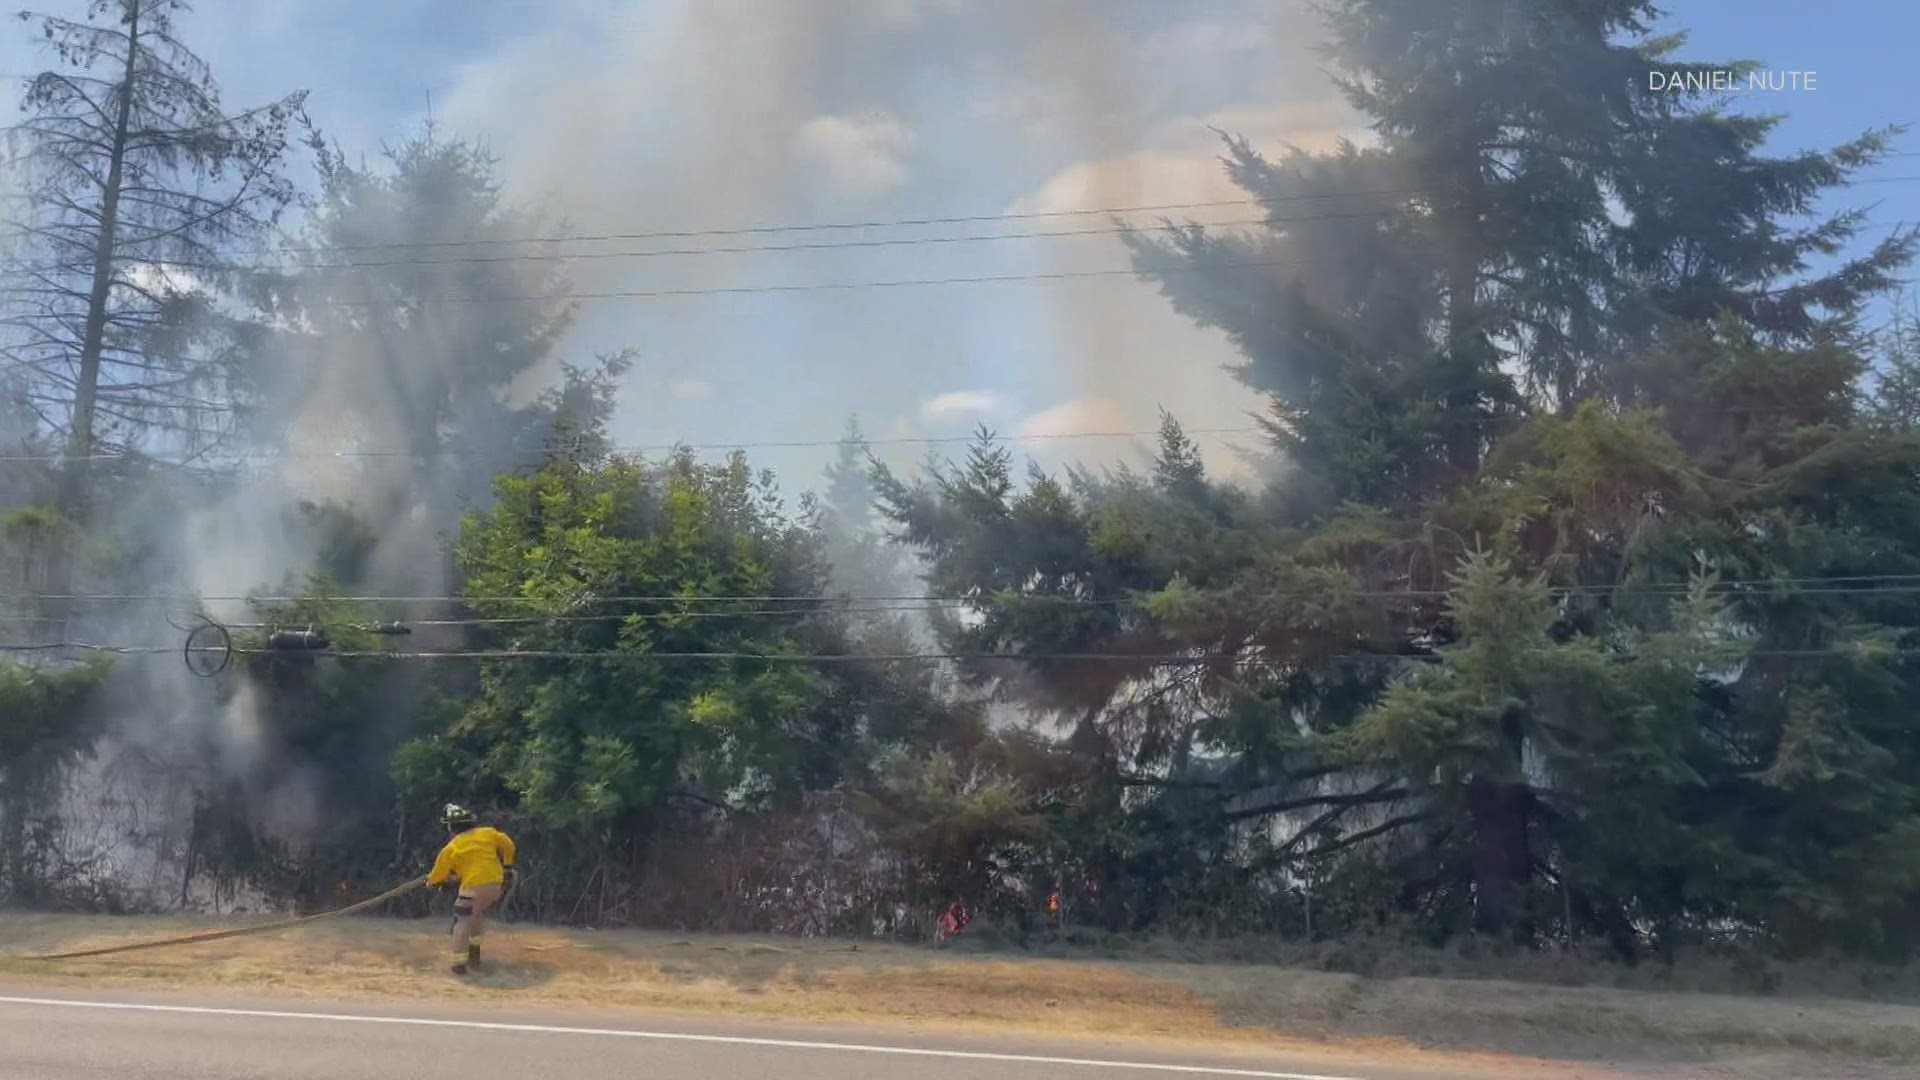 The Washington State Patrol said it appears that a dozen brush fires started along I-5 and Highway 101 Wednesday may have been intentionally set.